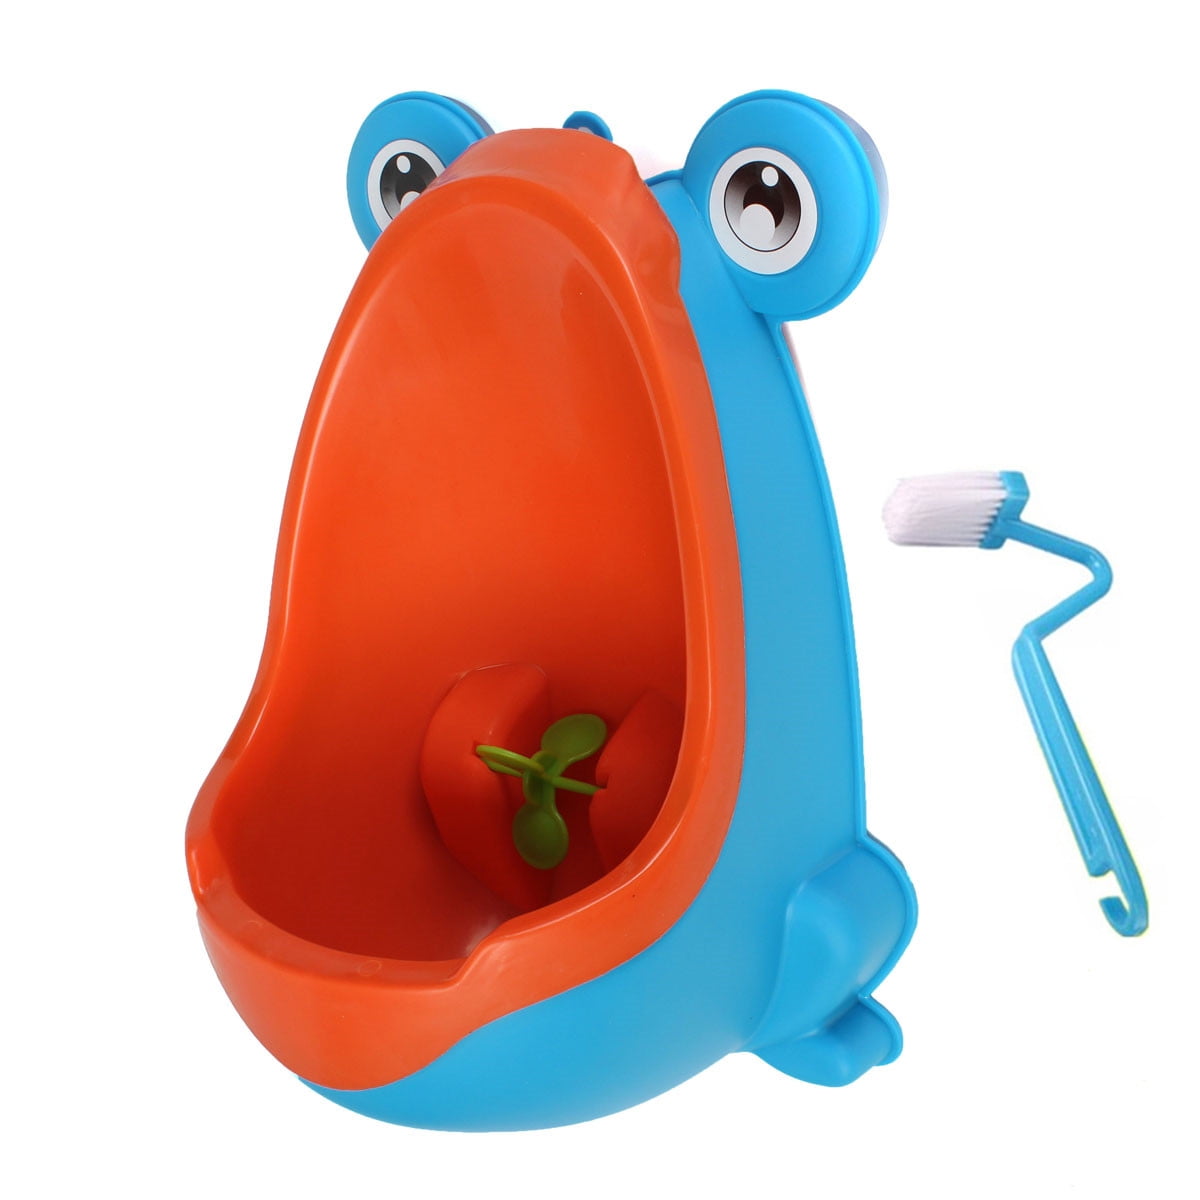 Boys Target Pee Trainer Potty Toilet Urinal Frog Trainning For Toddler Kids Baby 